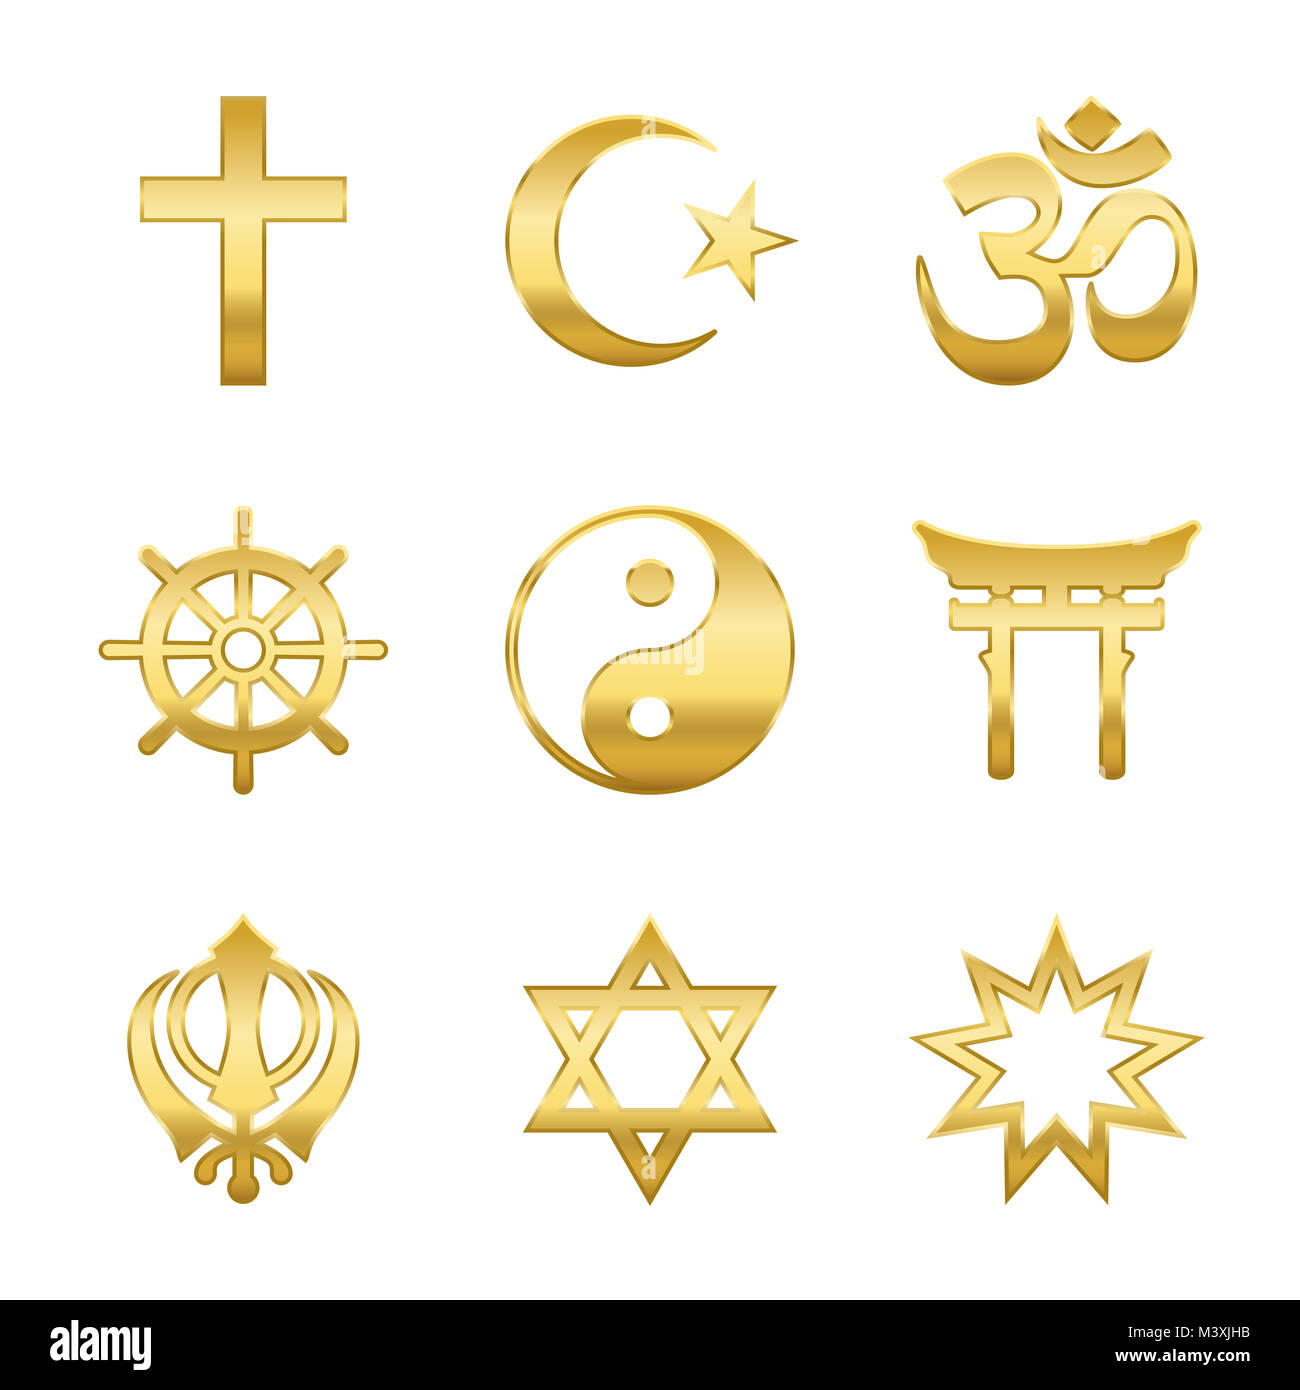 Golden world religion symbols. Signs of major religious groups and religions. Christianity, Islam, Hinduism, Buddhism, Taoism, Shinto, Sikhism Judaism Stock Photo